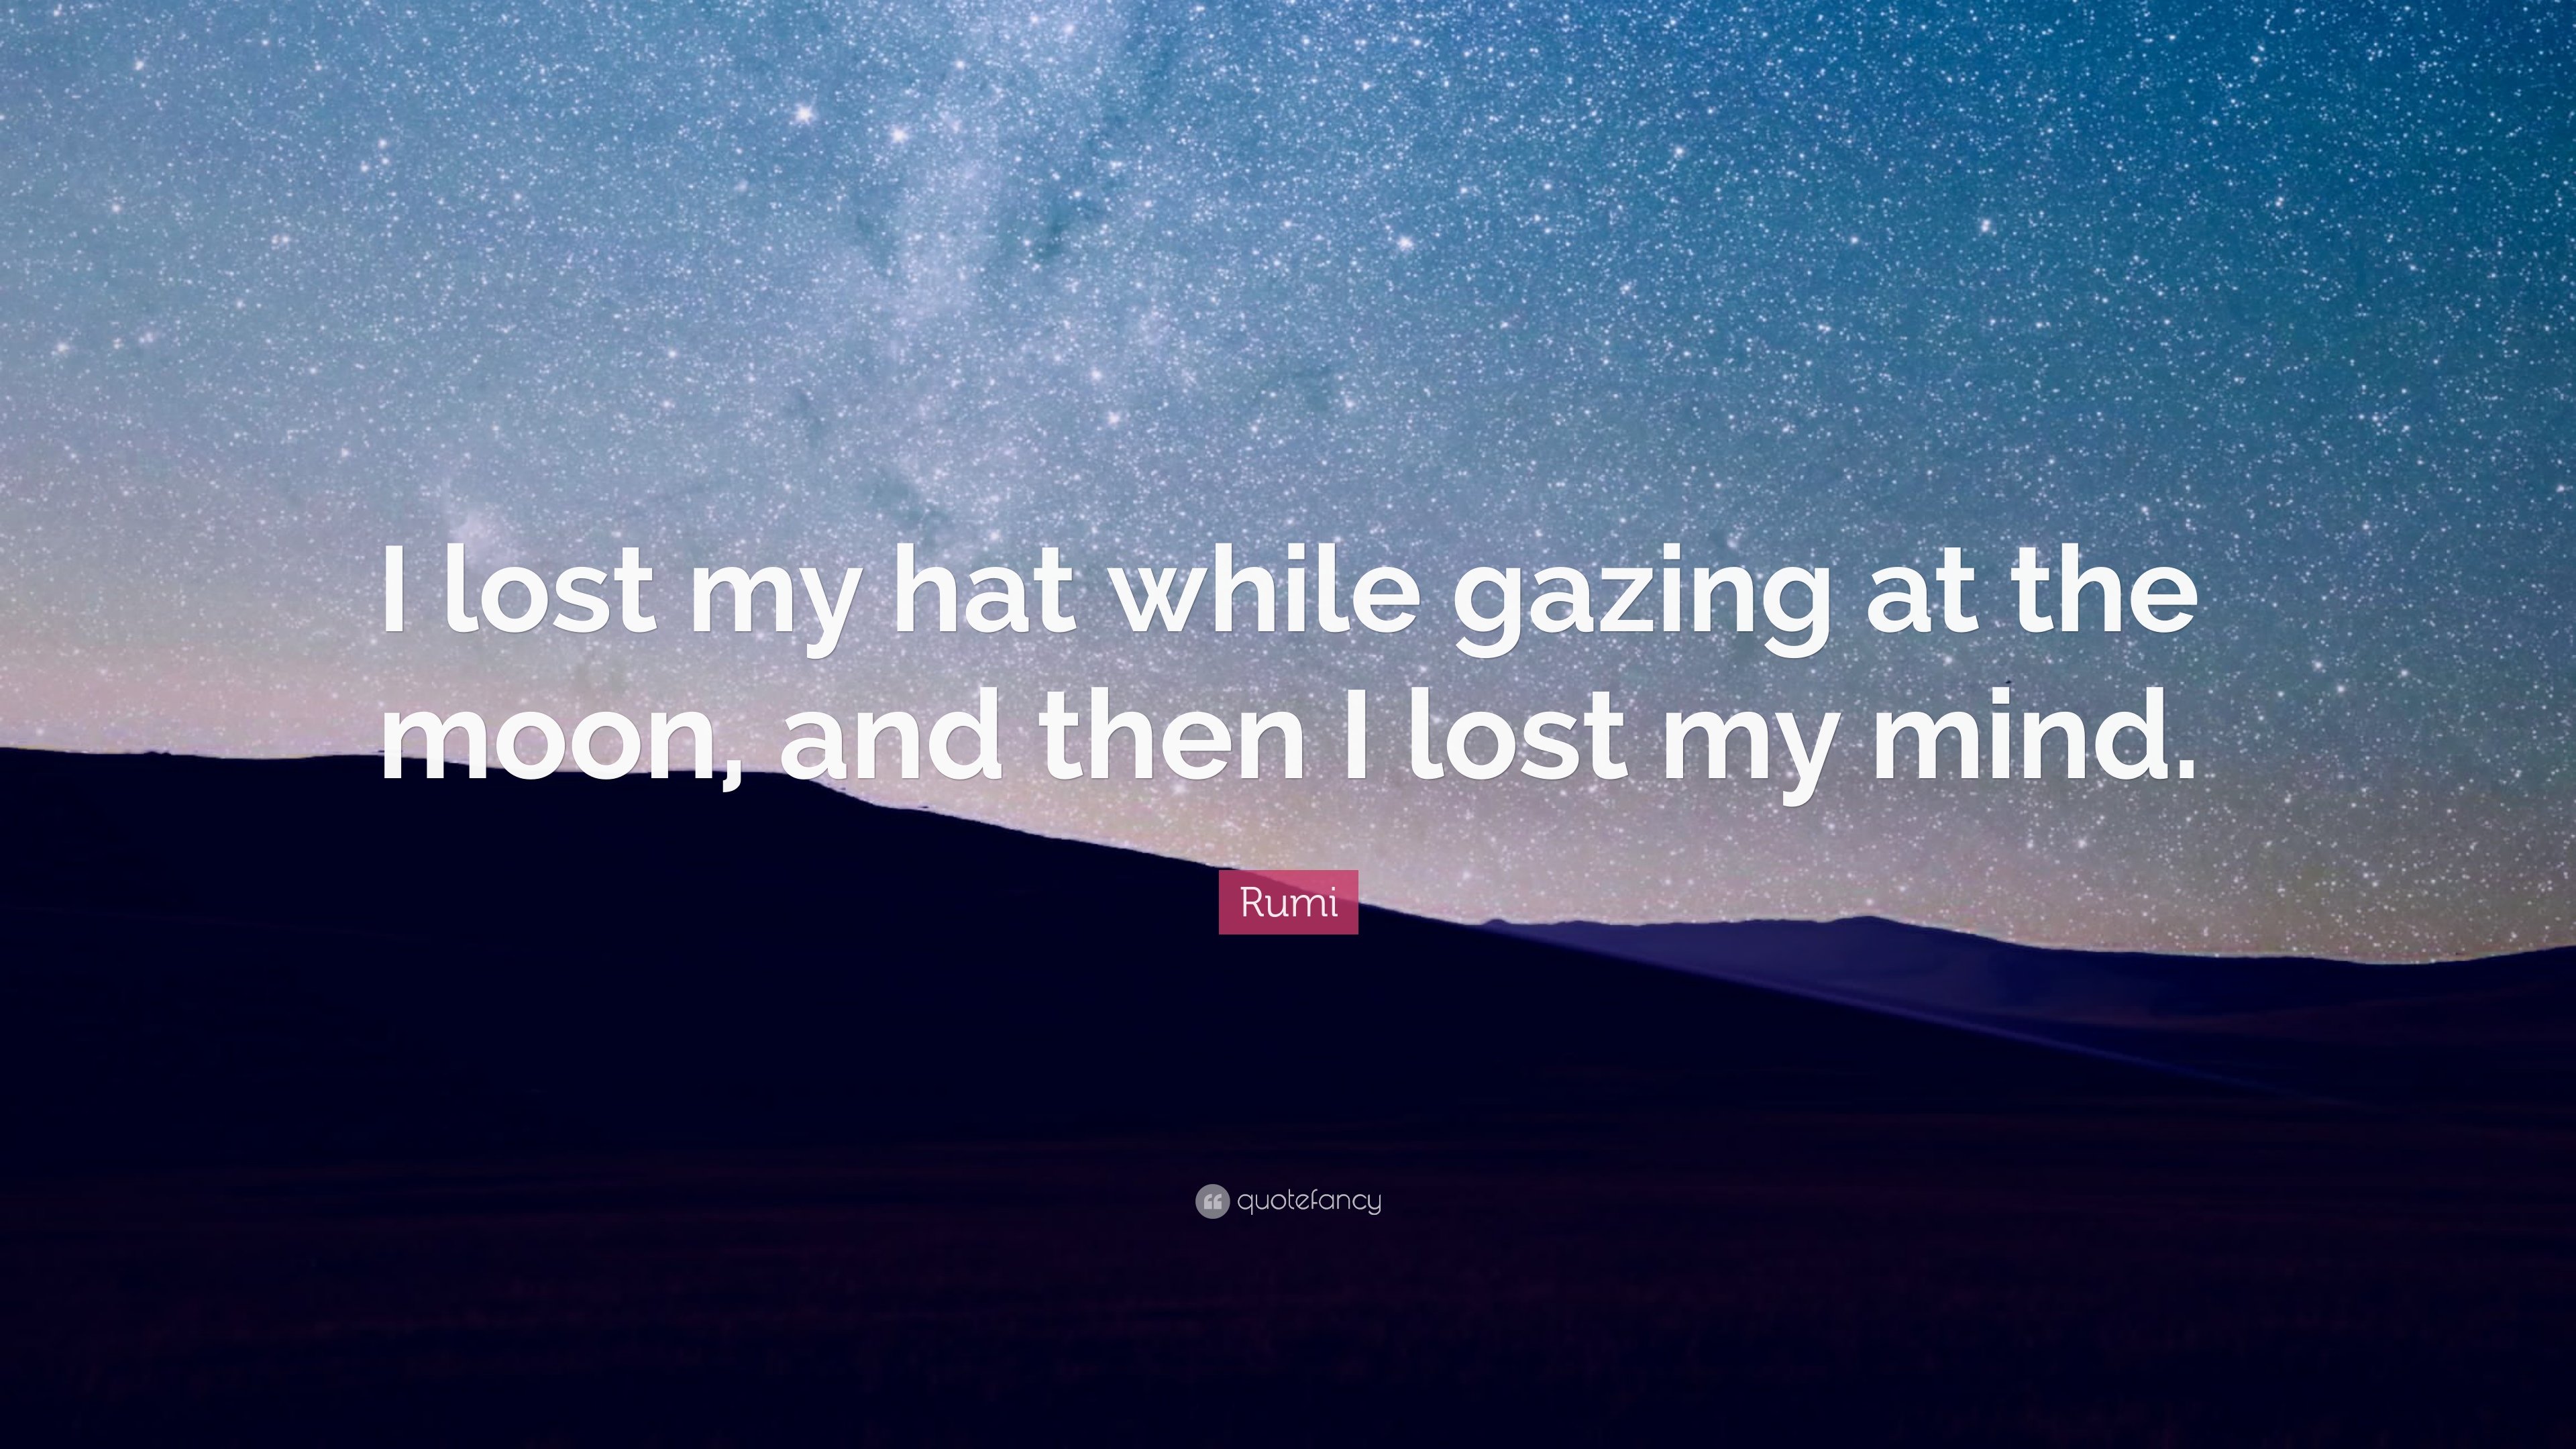 Rumi Quote: “I lost my hat while gazing at the moon, and then I lost my